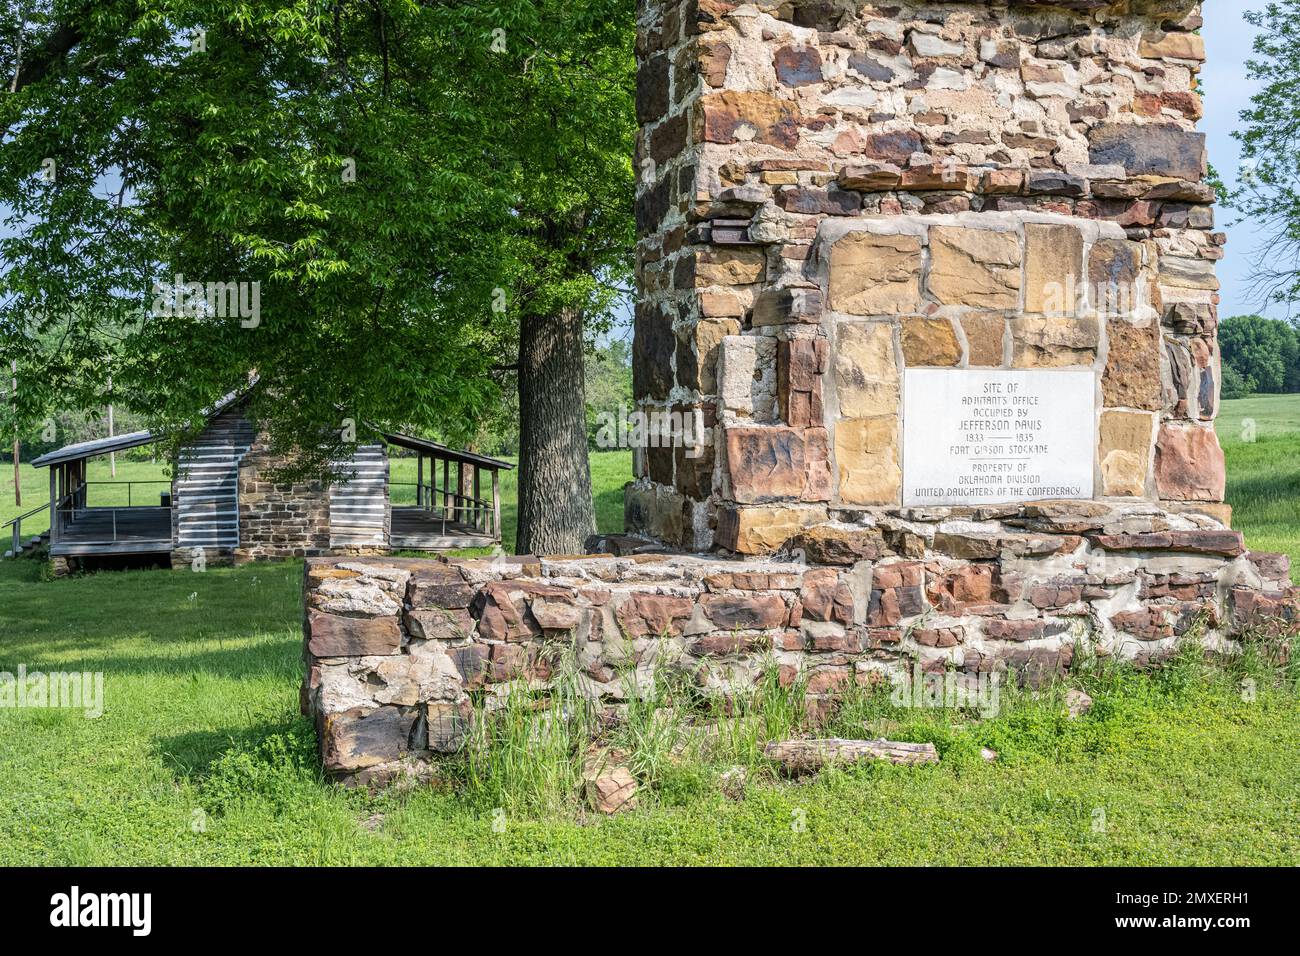 Stone chimney remnant from the Adjutant's Office (occupied by Jefferson Davis, 1833-1835) at Fort Gibson Stockade in Fort Gibson, Oklahoma. (USA) Stock Photo